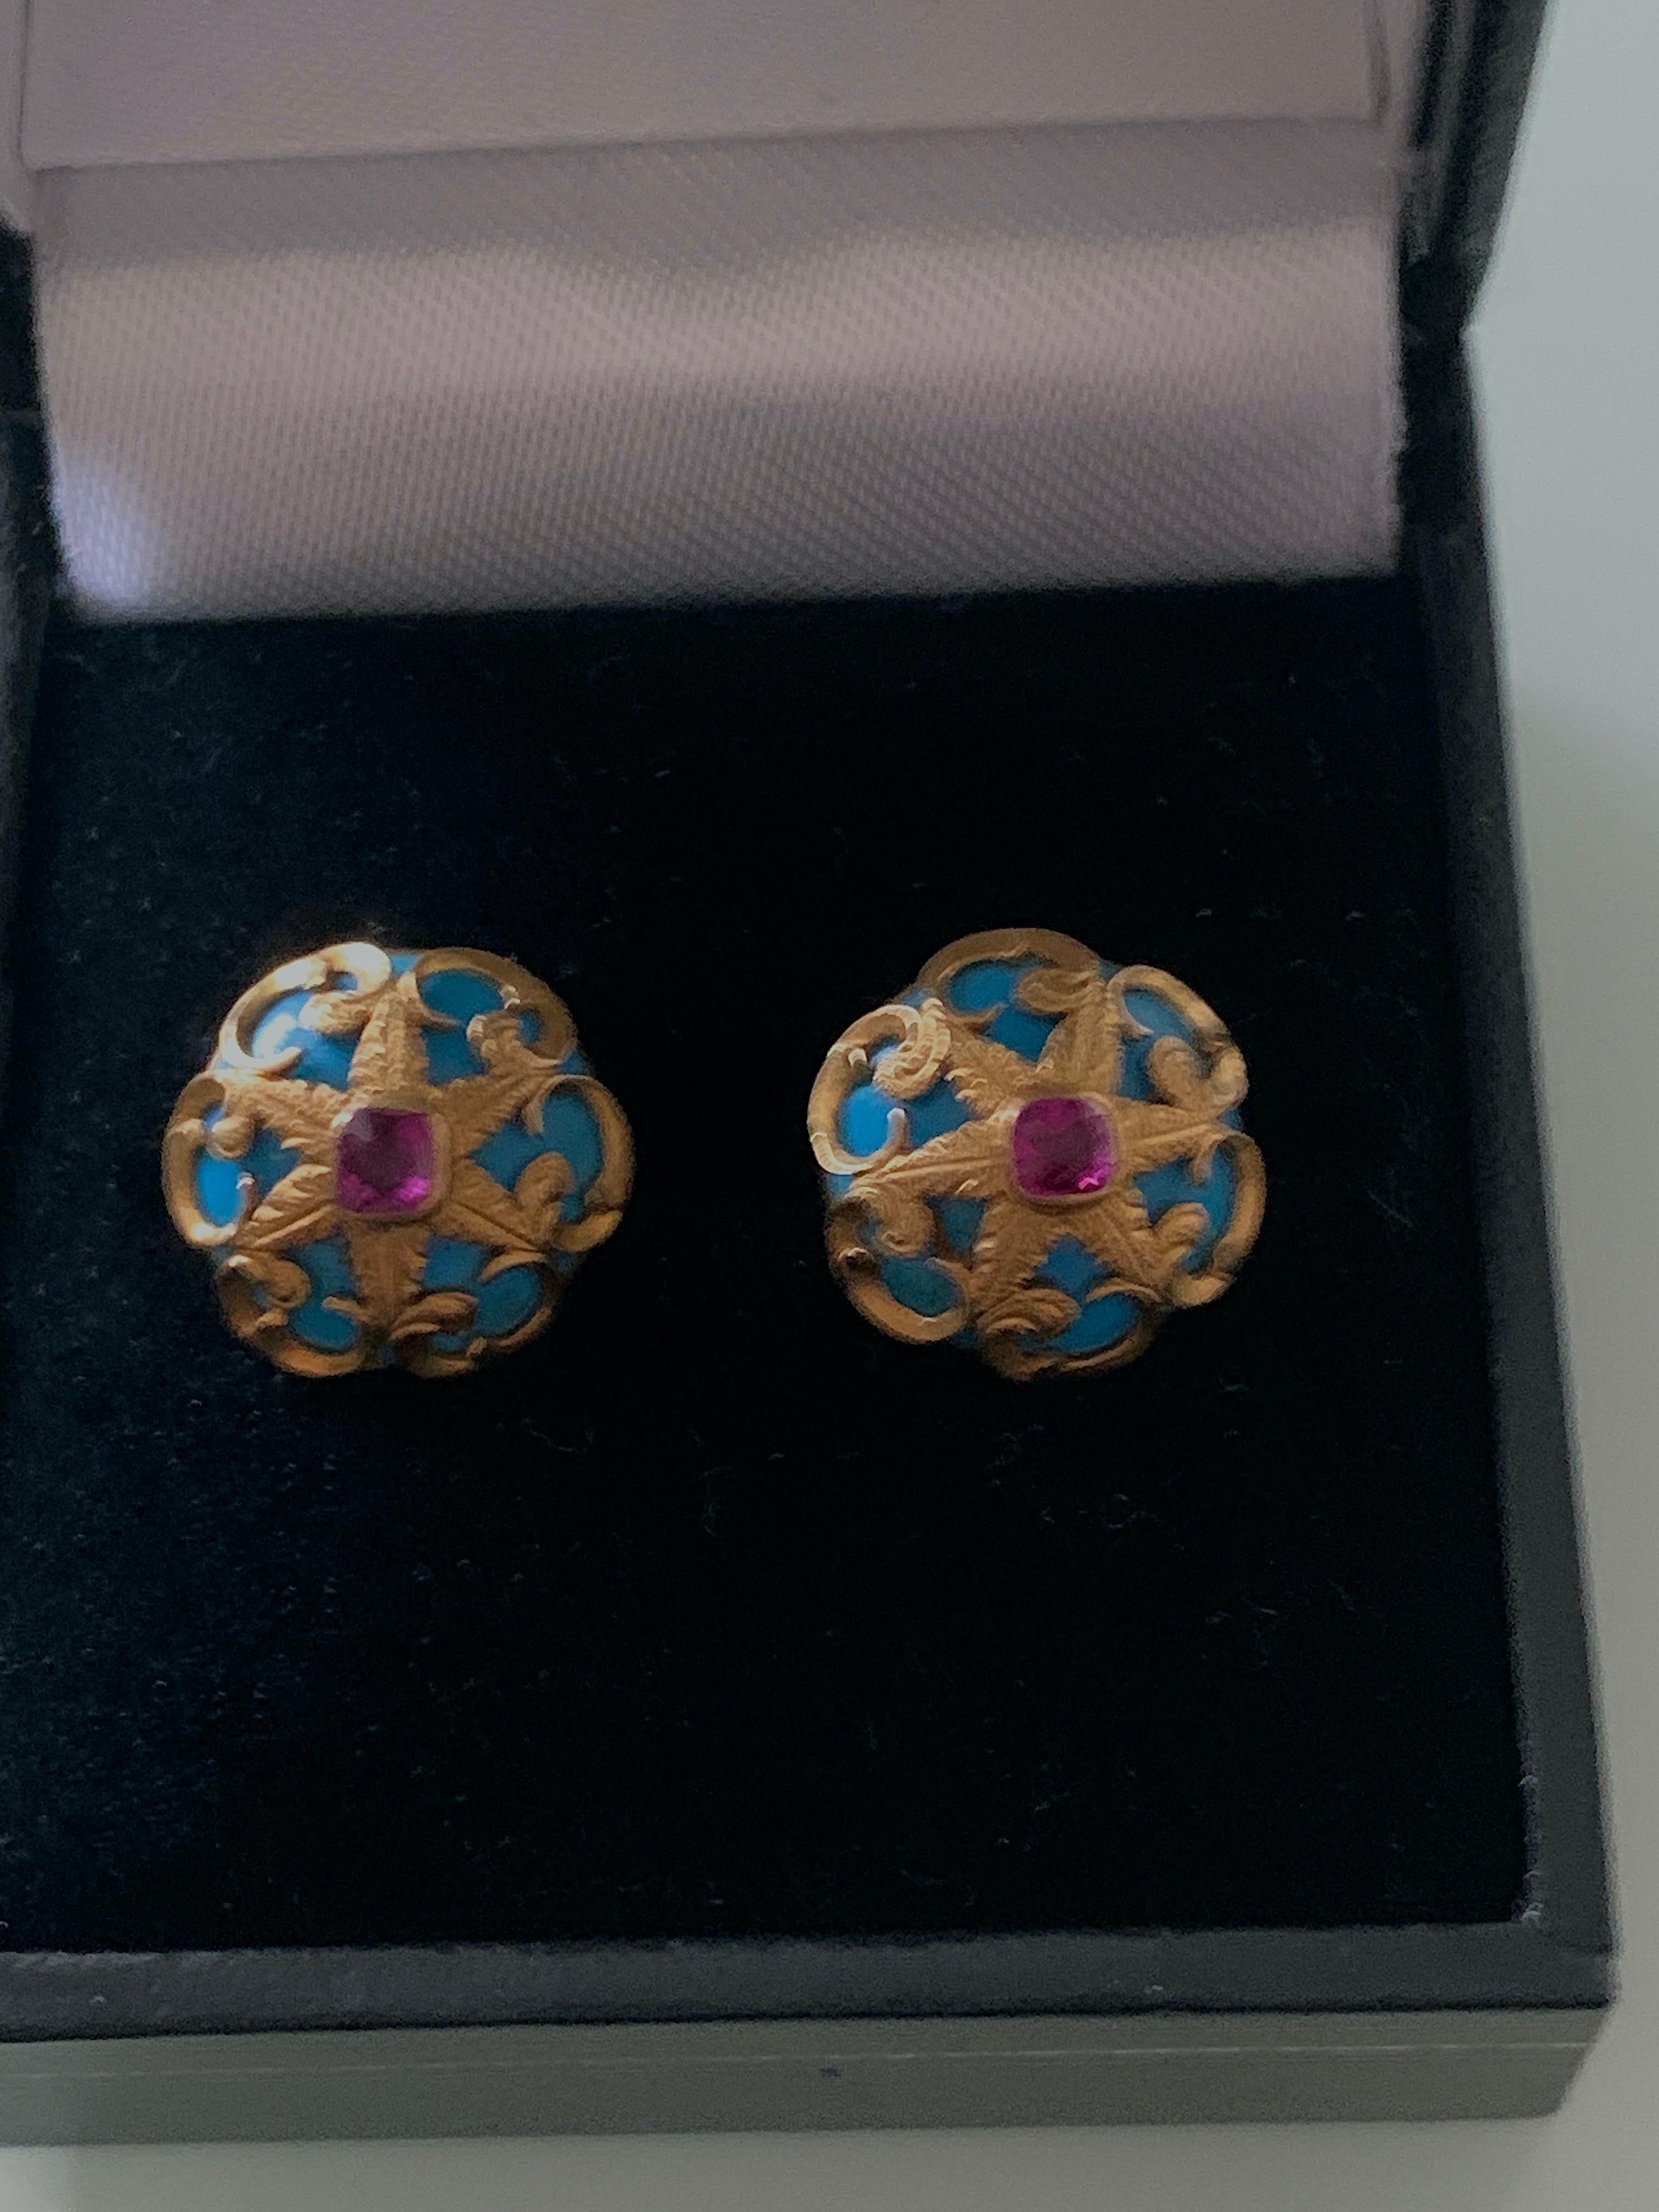 Exquisite 
9ct Gold Fret work turquoise earrings
with central rubies
each ruby is approx 0.16 carat

the rubies are very clear and pinkish in colour
Stamped 9ct on reverse 
